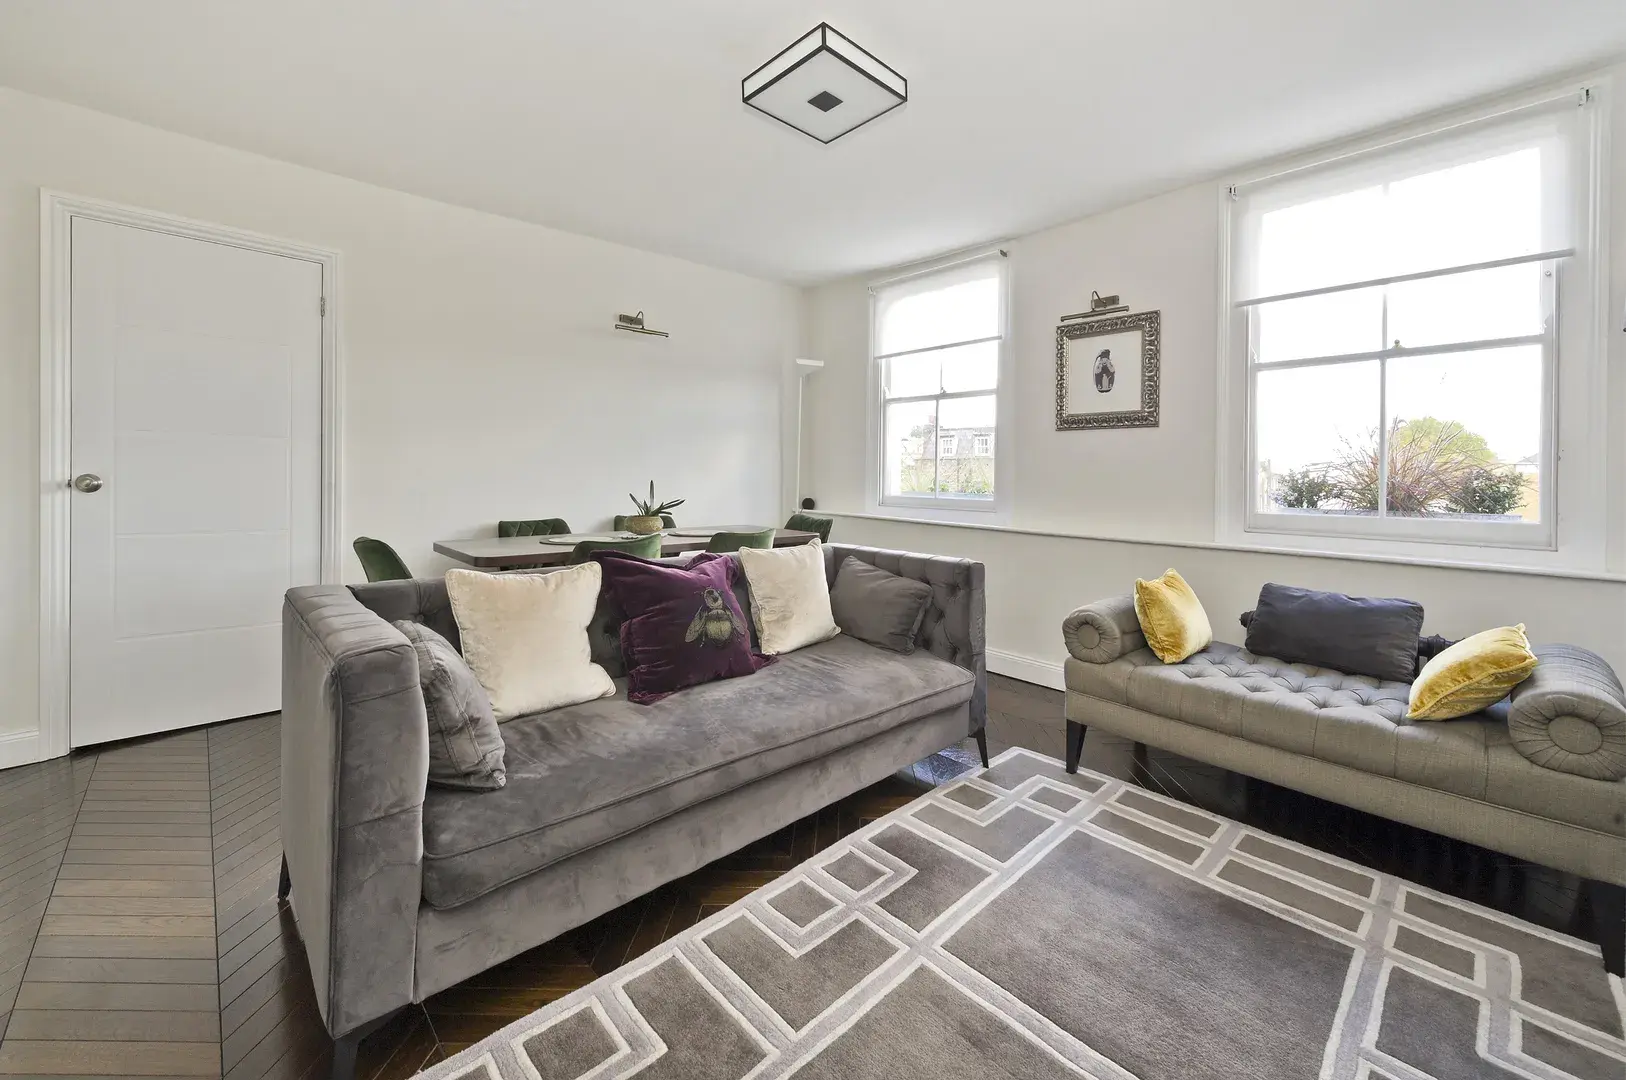 Liverpool Road, holiday home in Islington, London